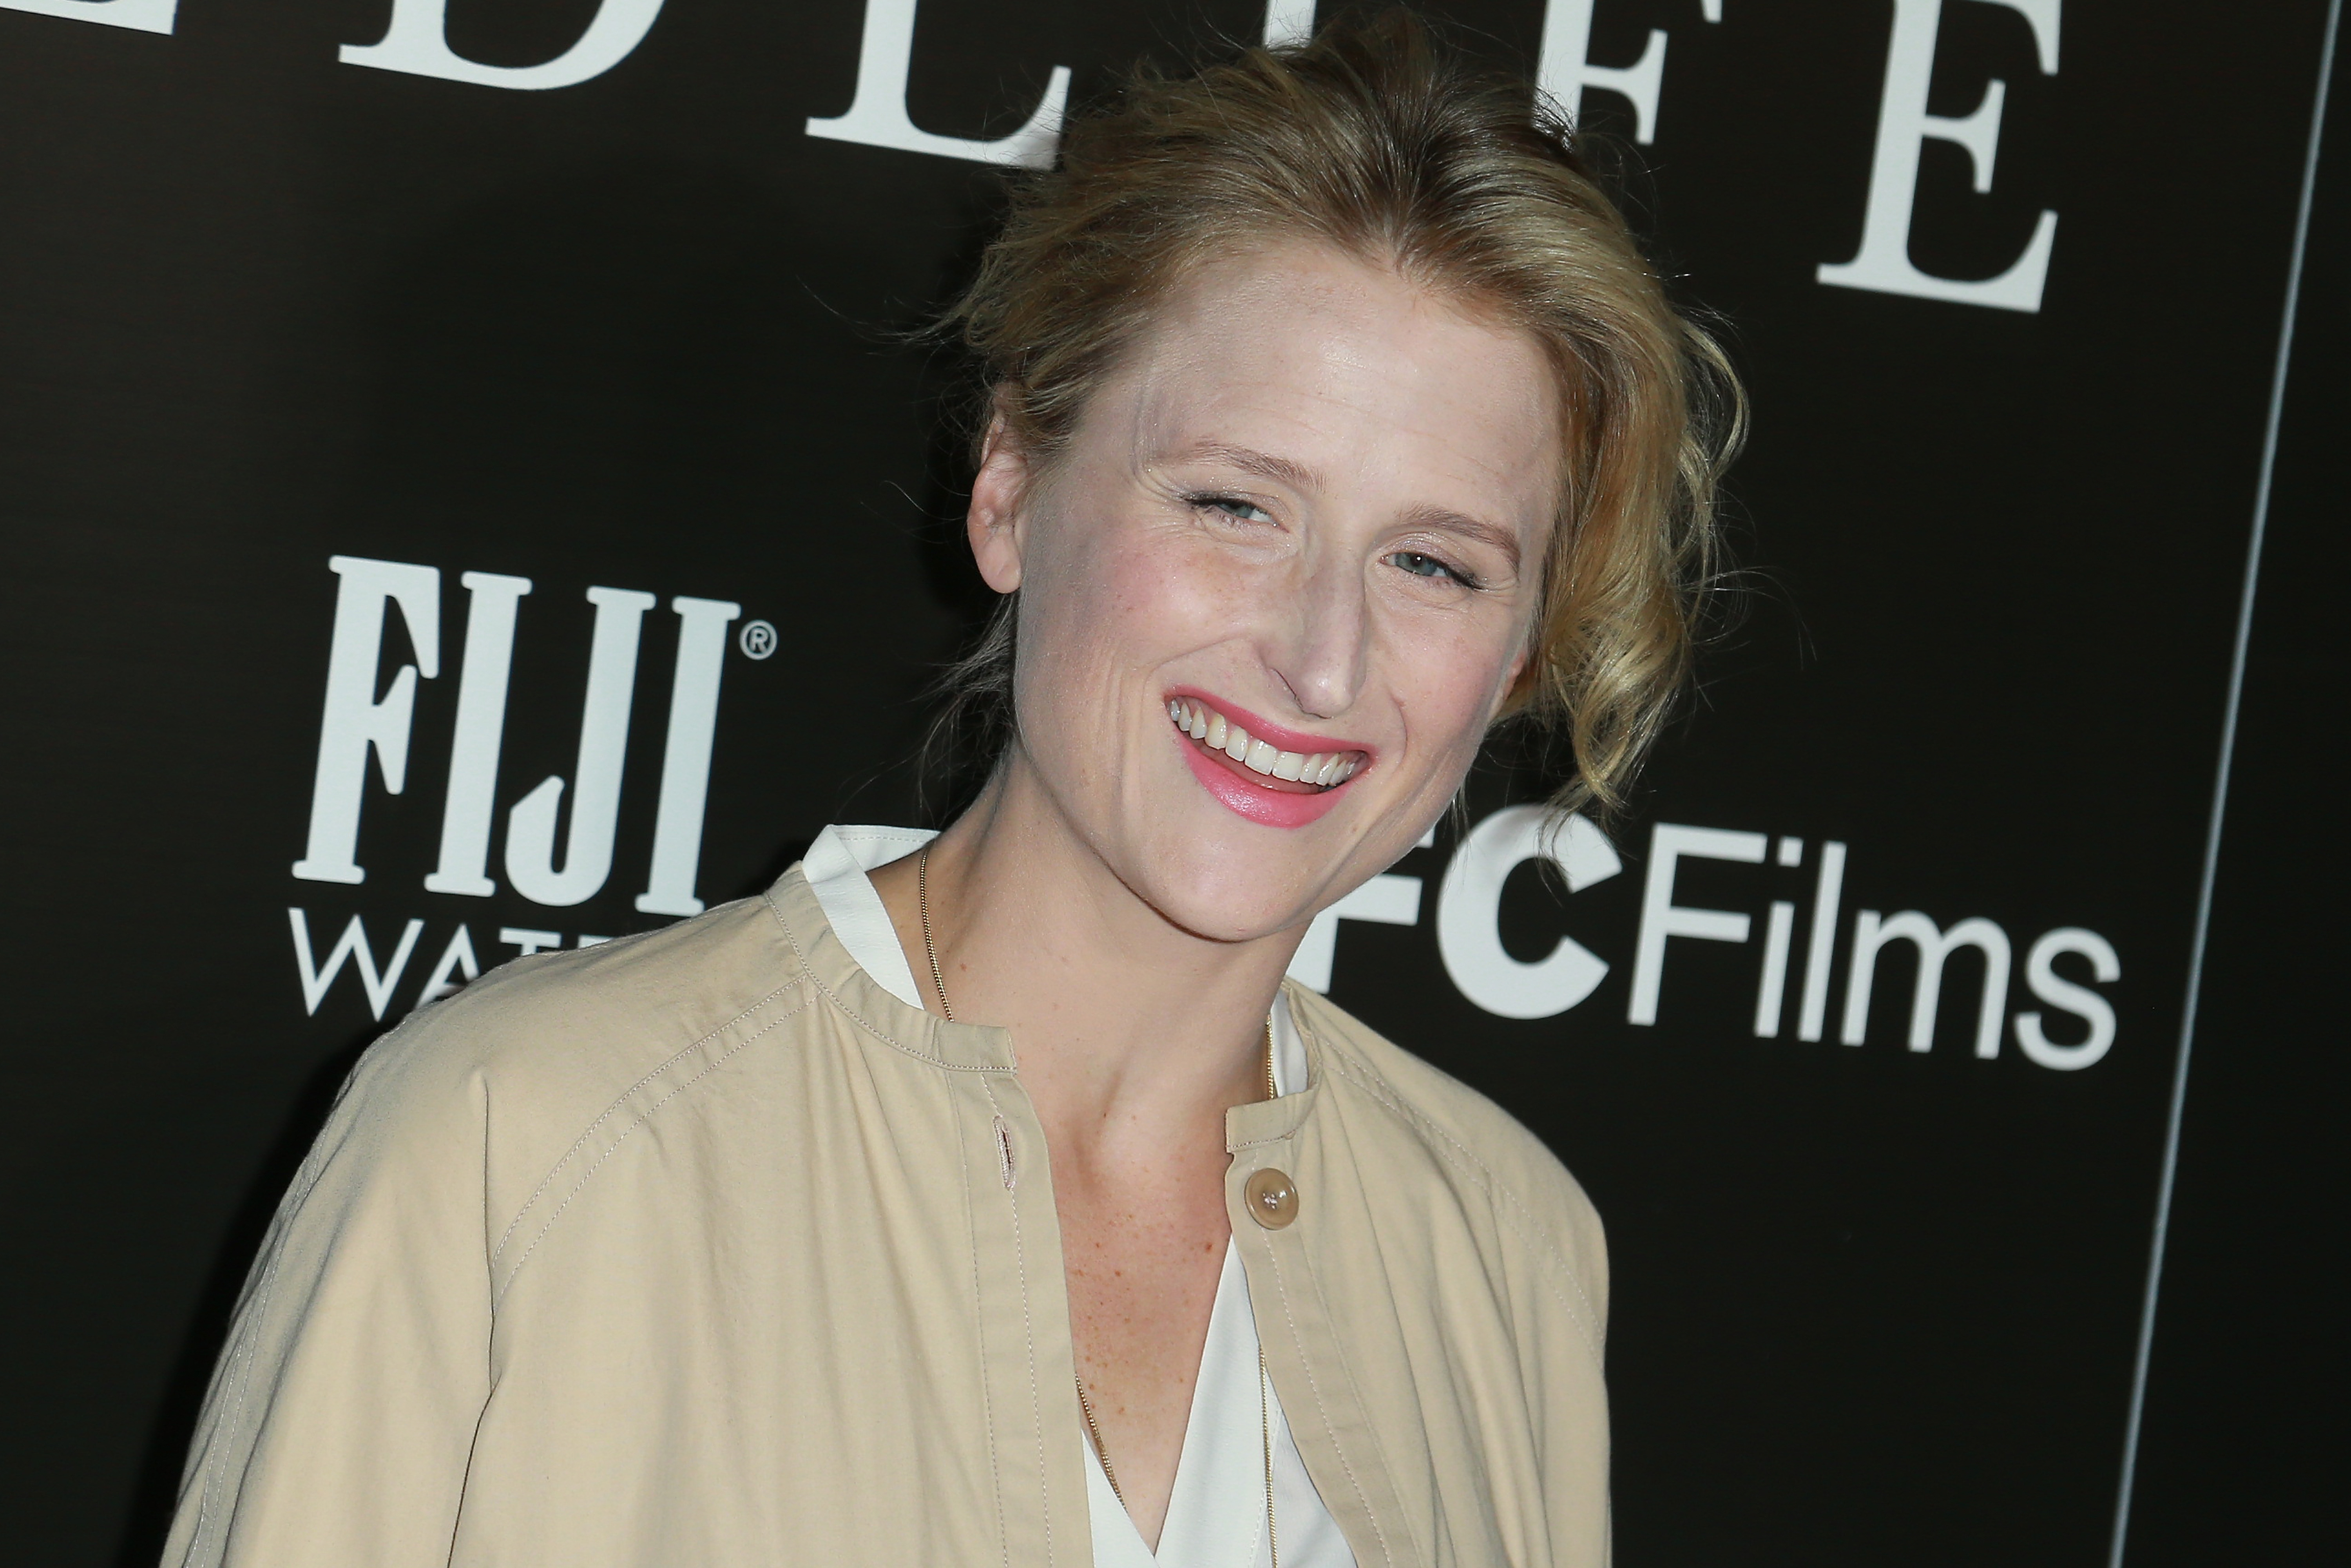 Mamie Gummer attends Los Angeles Premiere For IFC Films' "Wildlife" at ArcLight Hollywood on October 9, 2018 in Hollywood, California. | Source: Getty Images